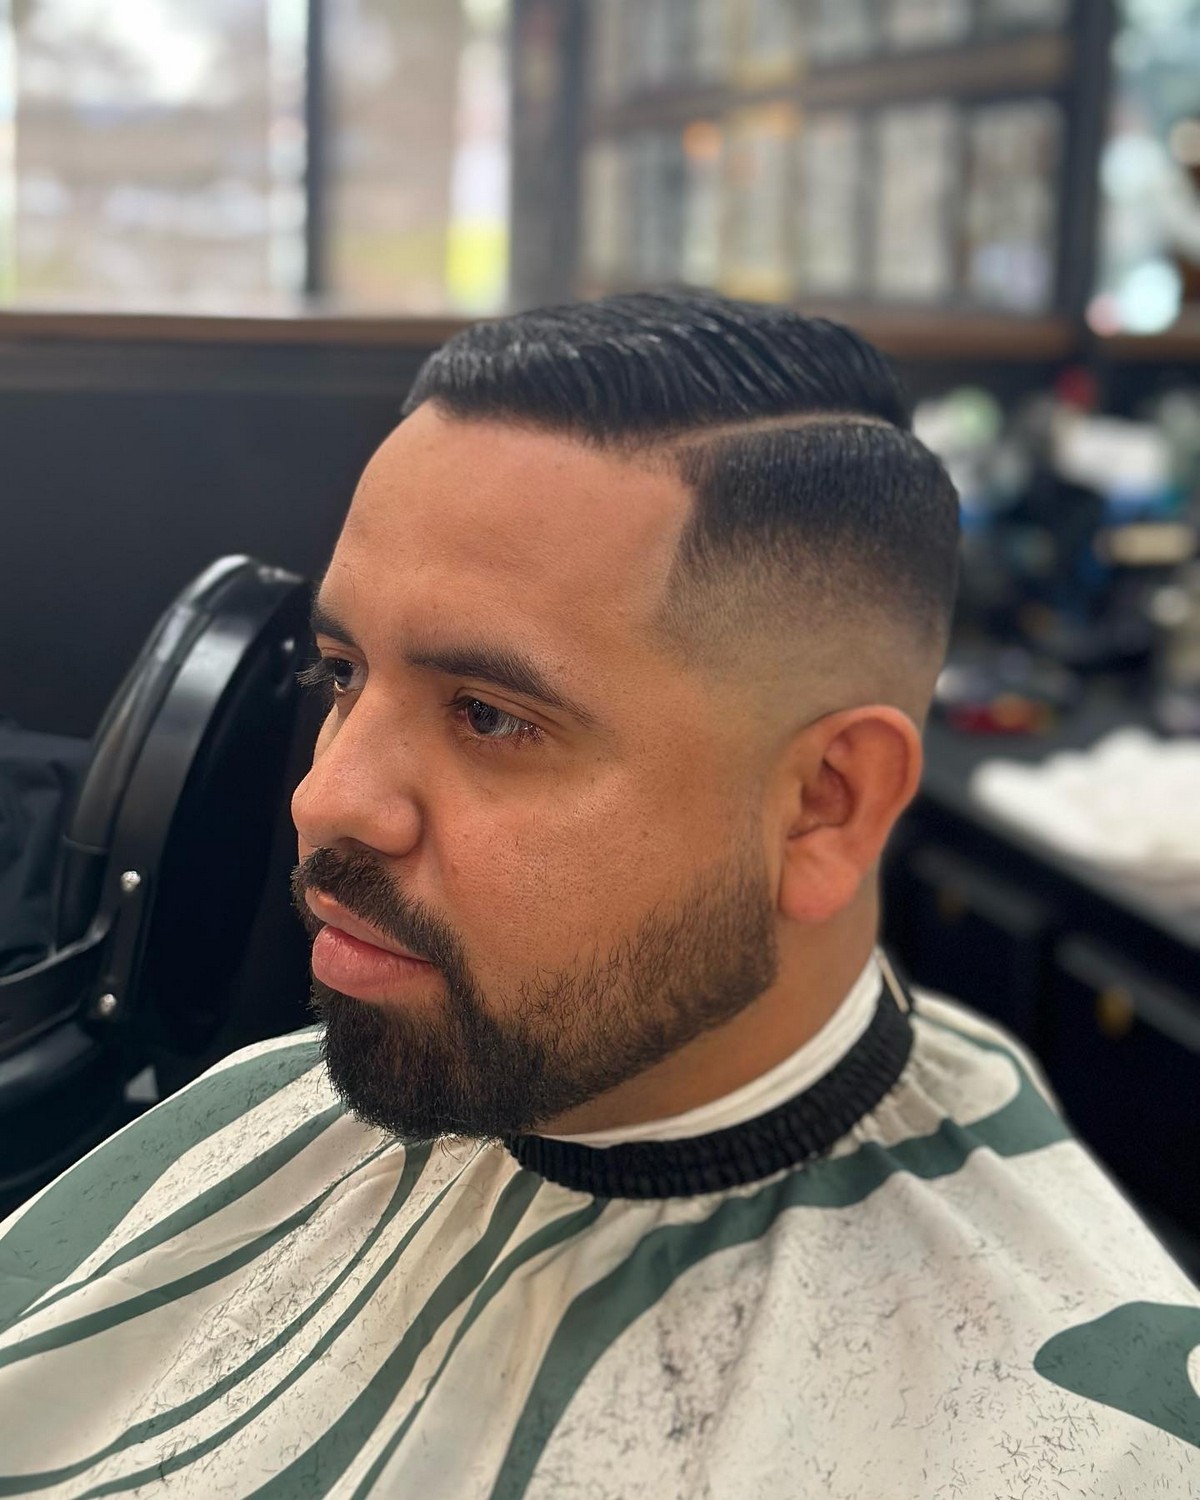 Baldfade with side part